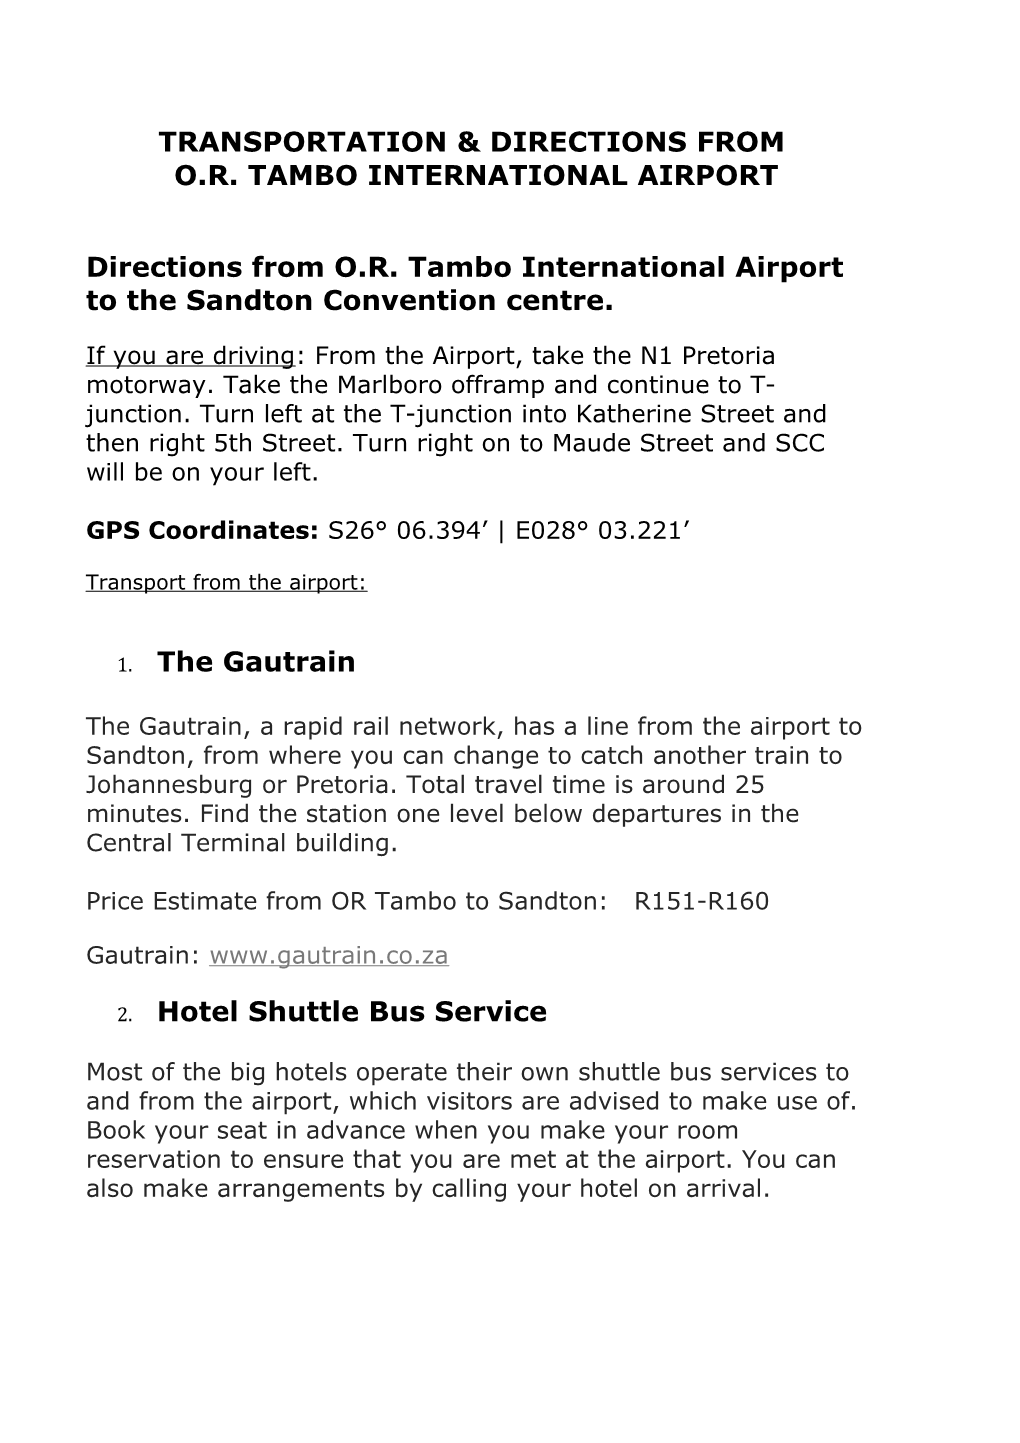 Directions from O.R. Tambo International Airport